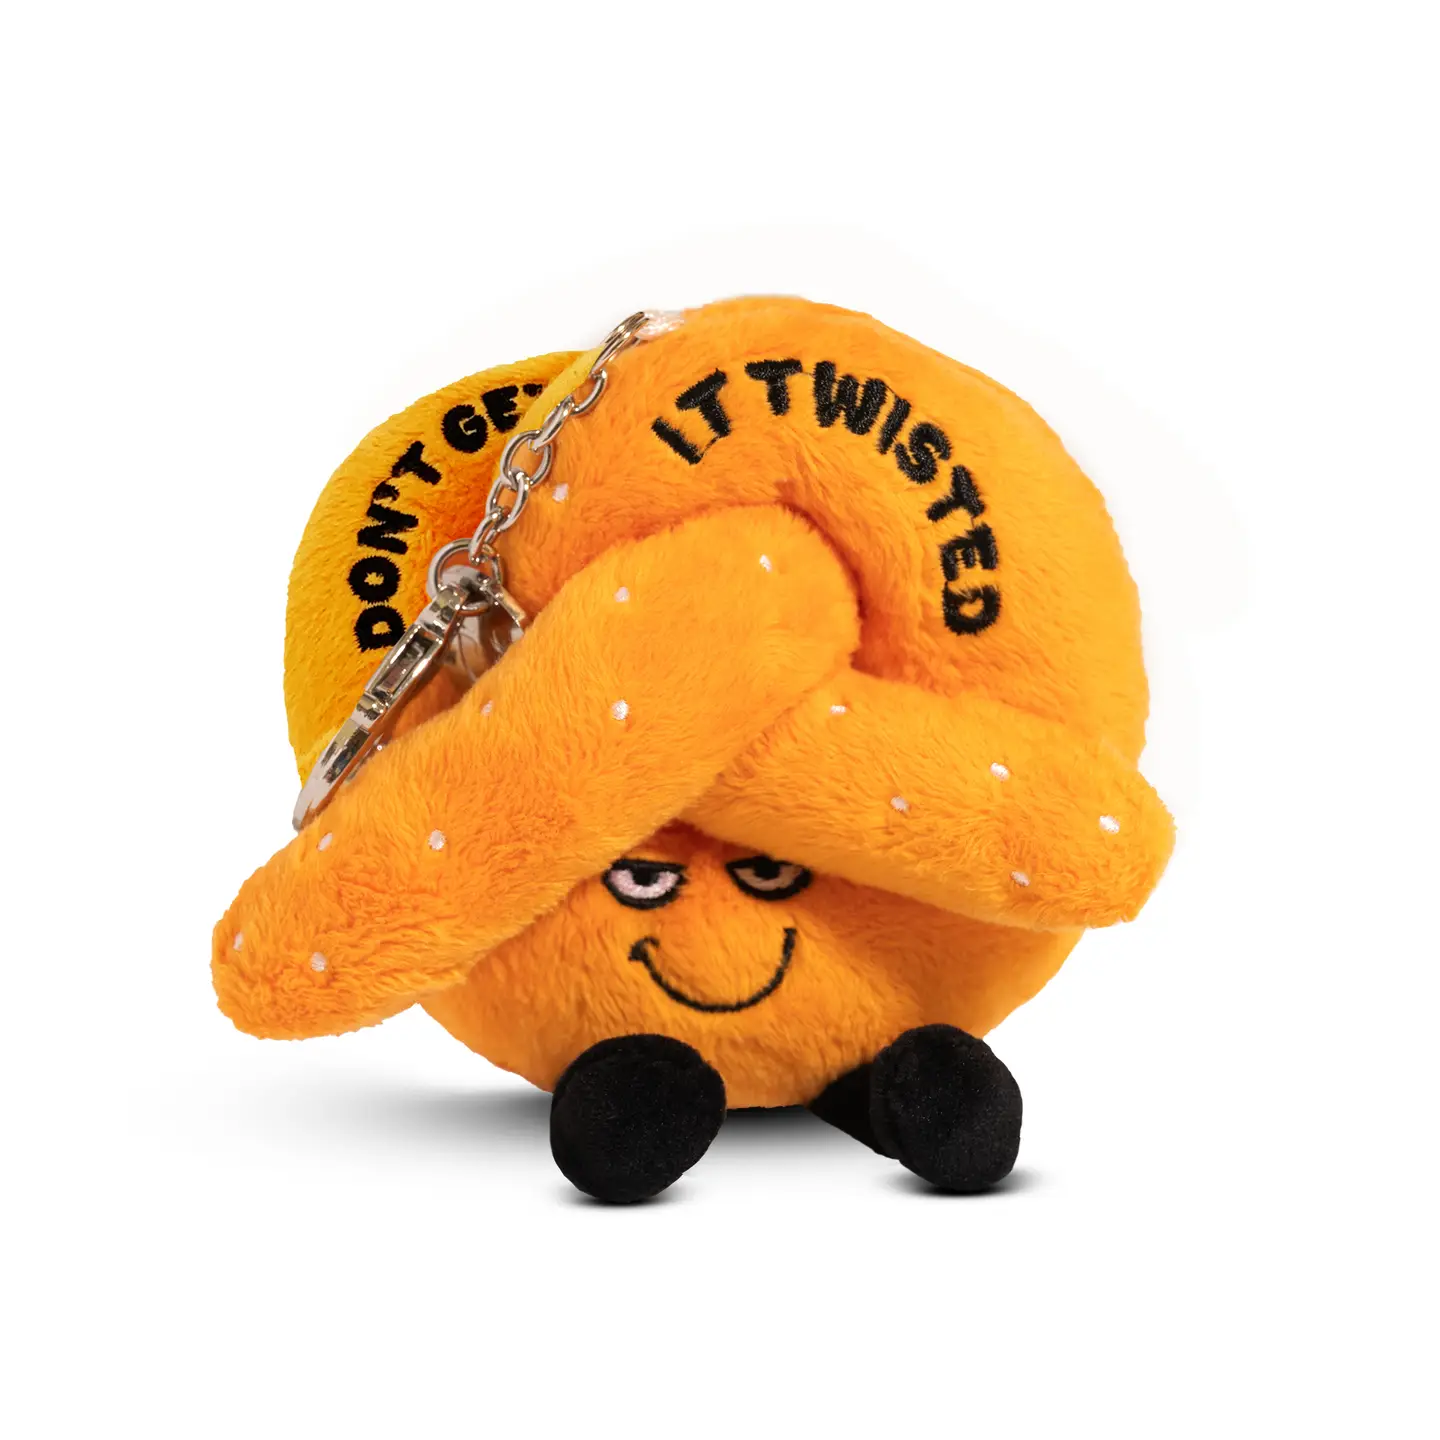 Don’t get salty, but this bite-sized plush is knot interested in your lies. He only wants the facts. His sinister smile, dangly legs, and salty 3D topping make him a must-have. He’d look super cute hanging from any purse or bag.